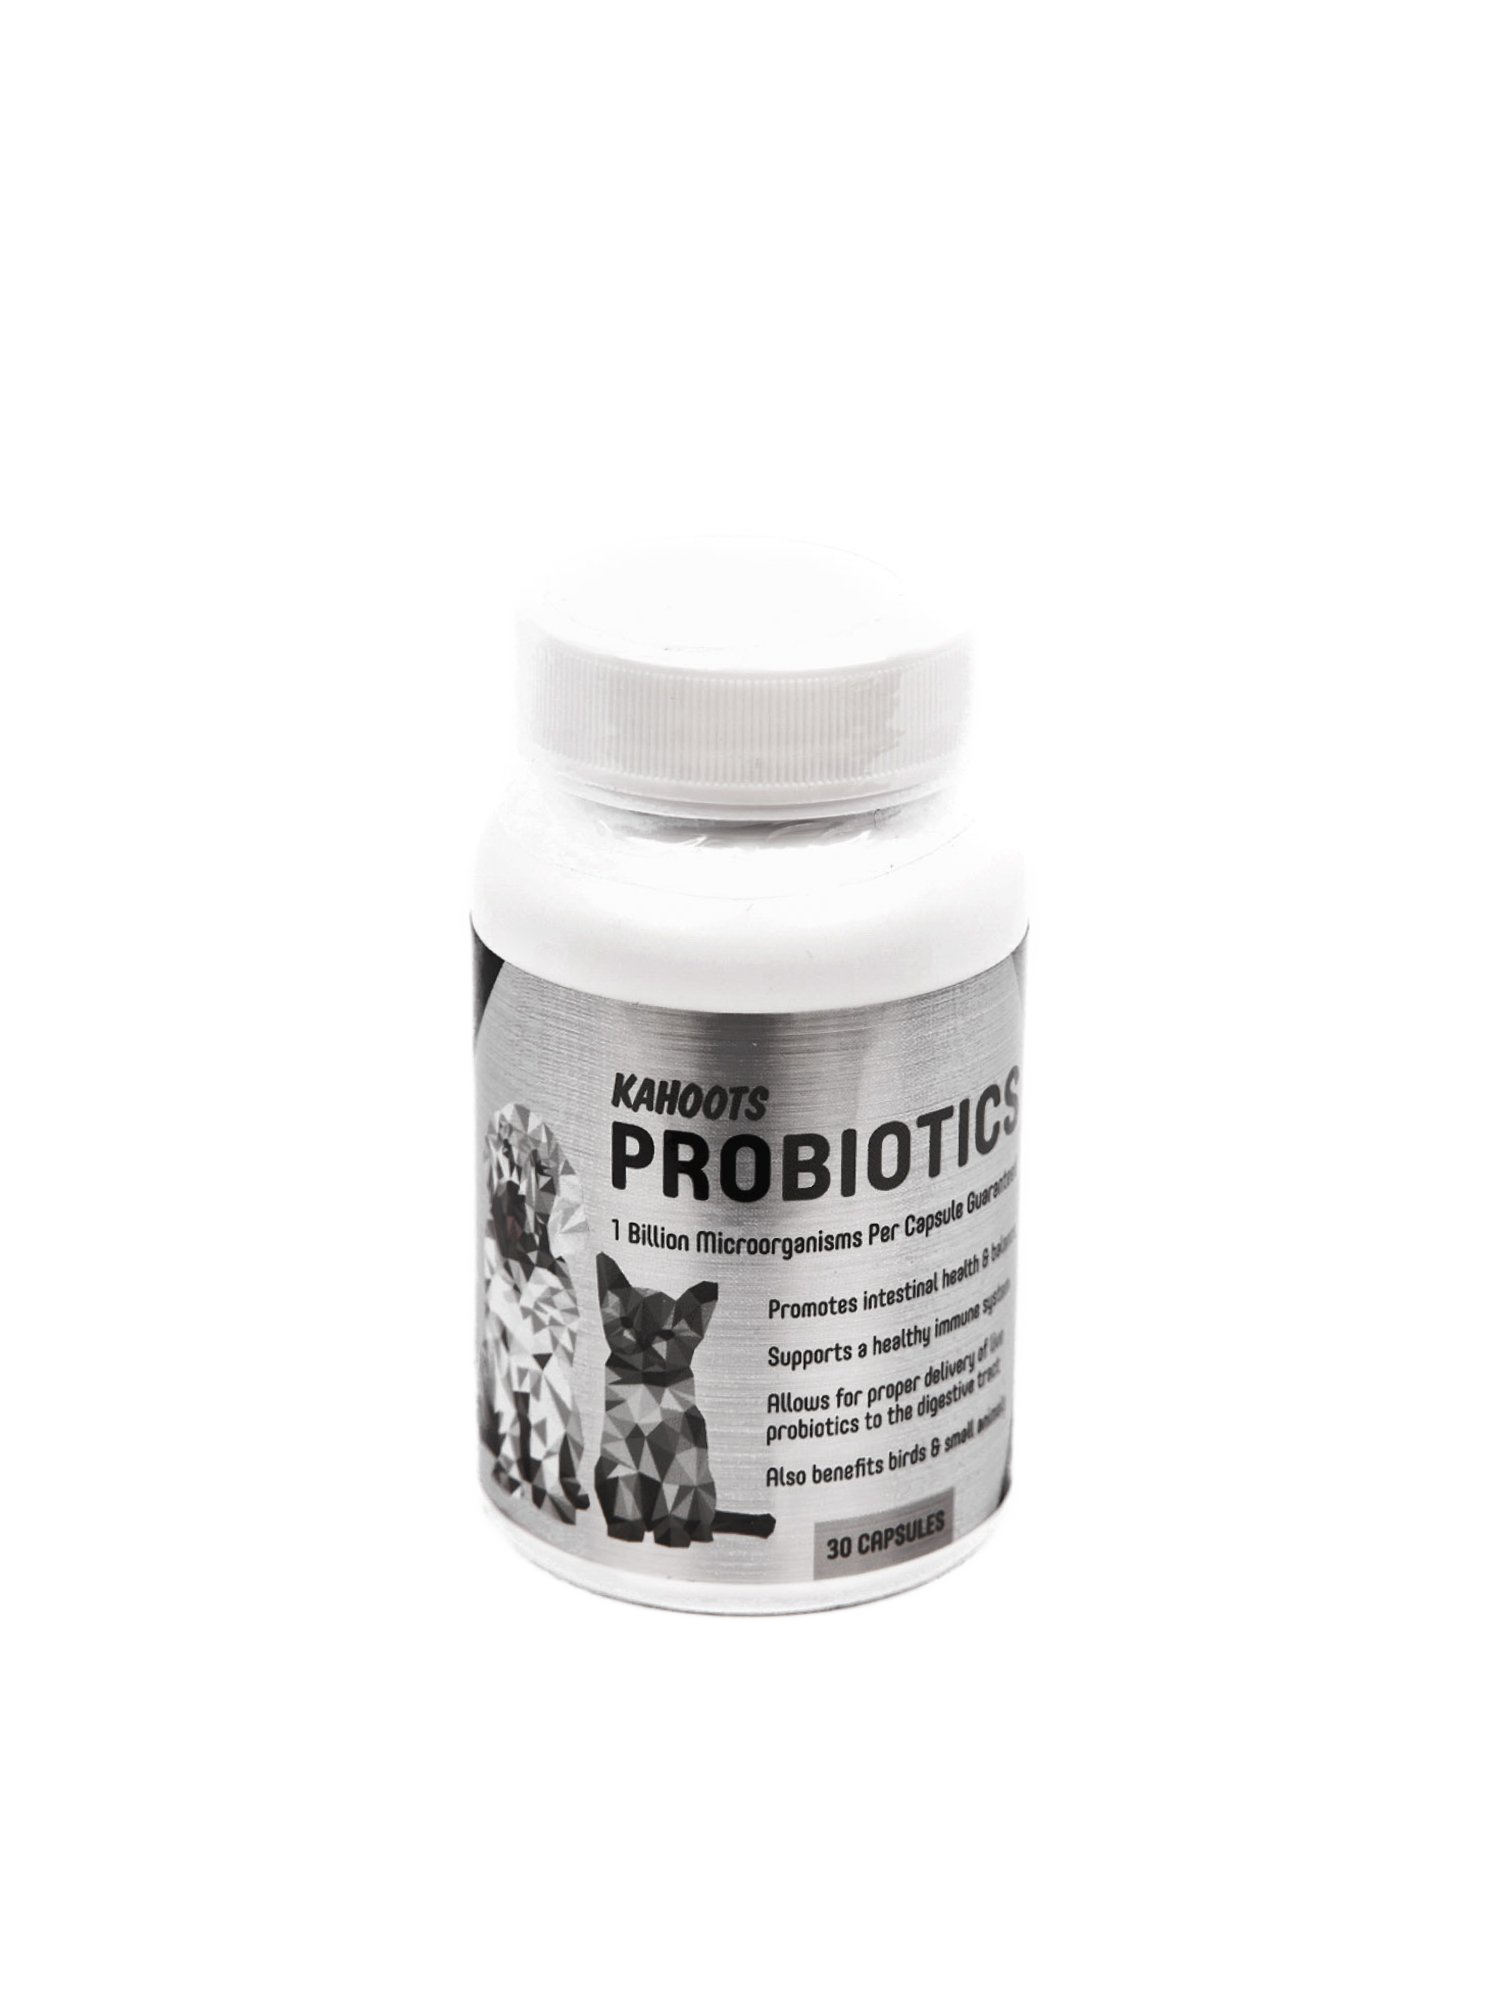 Probiotics container. White bottle with metalic label. Picture of dog and cat on label. 30 count